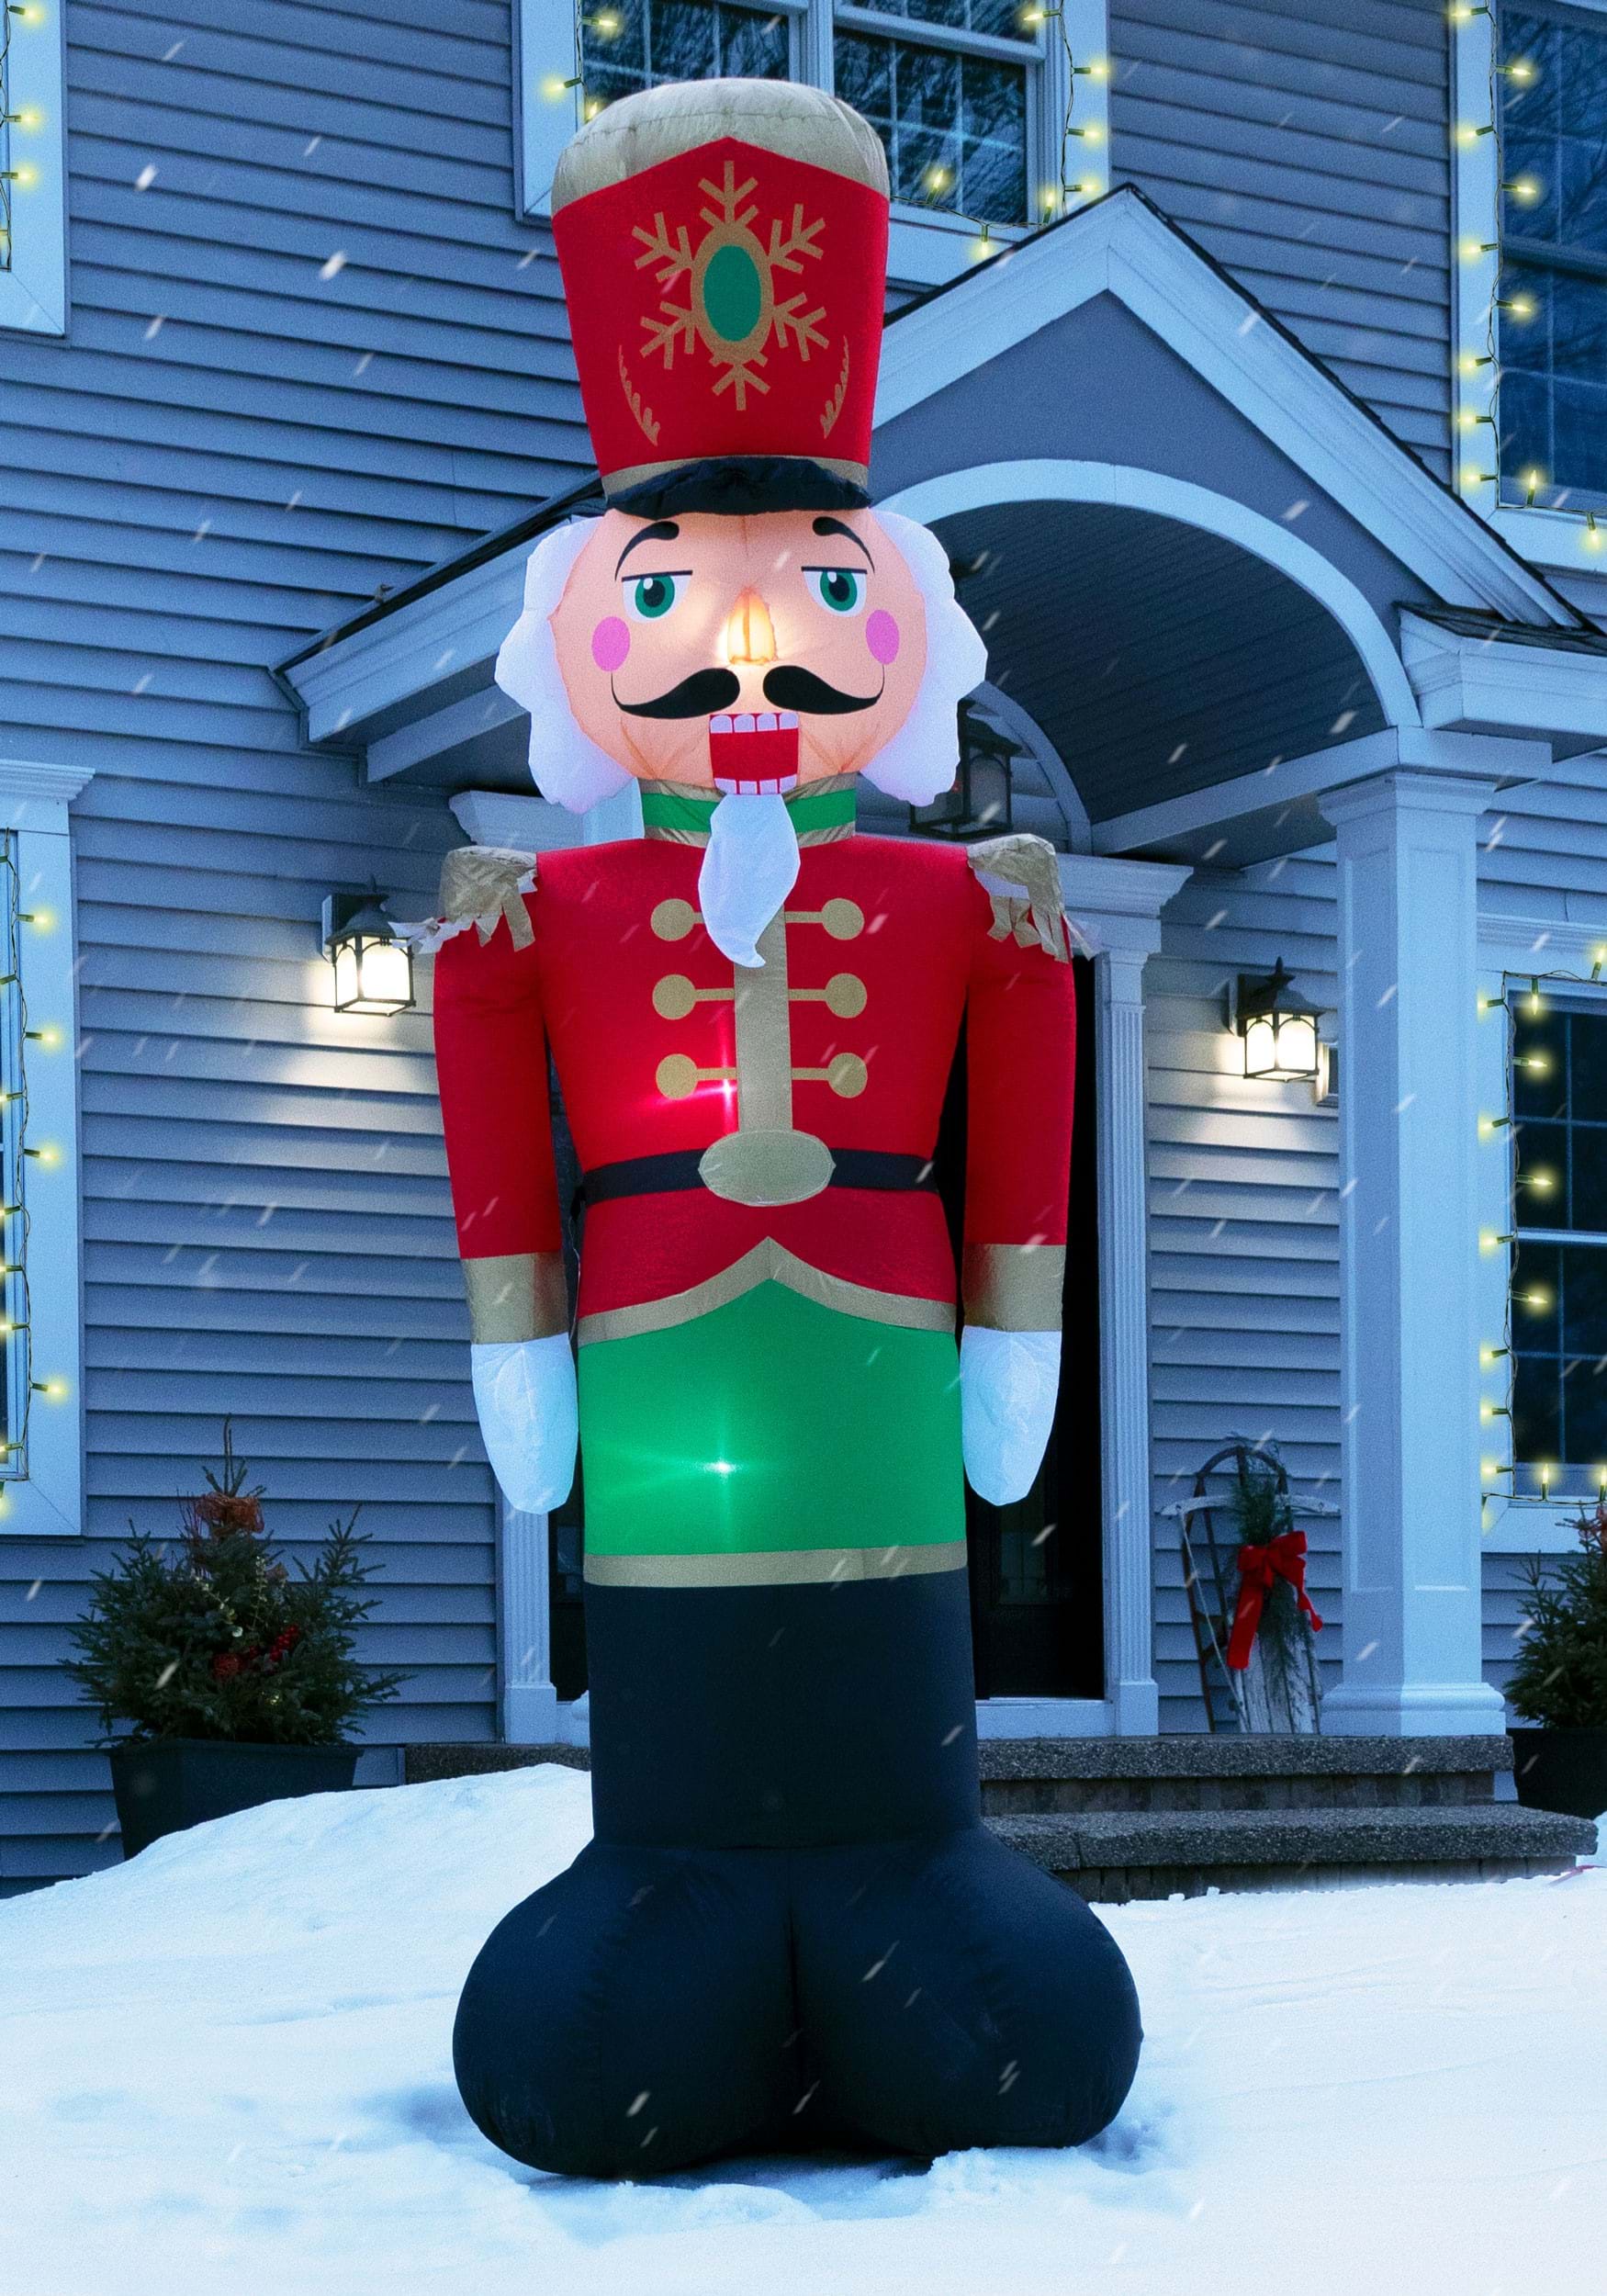 Inflatable Soldier Decoration